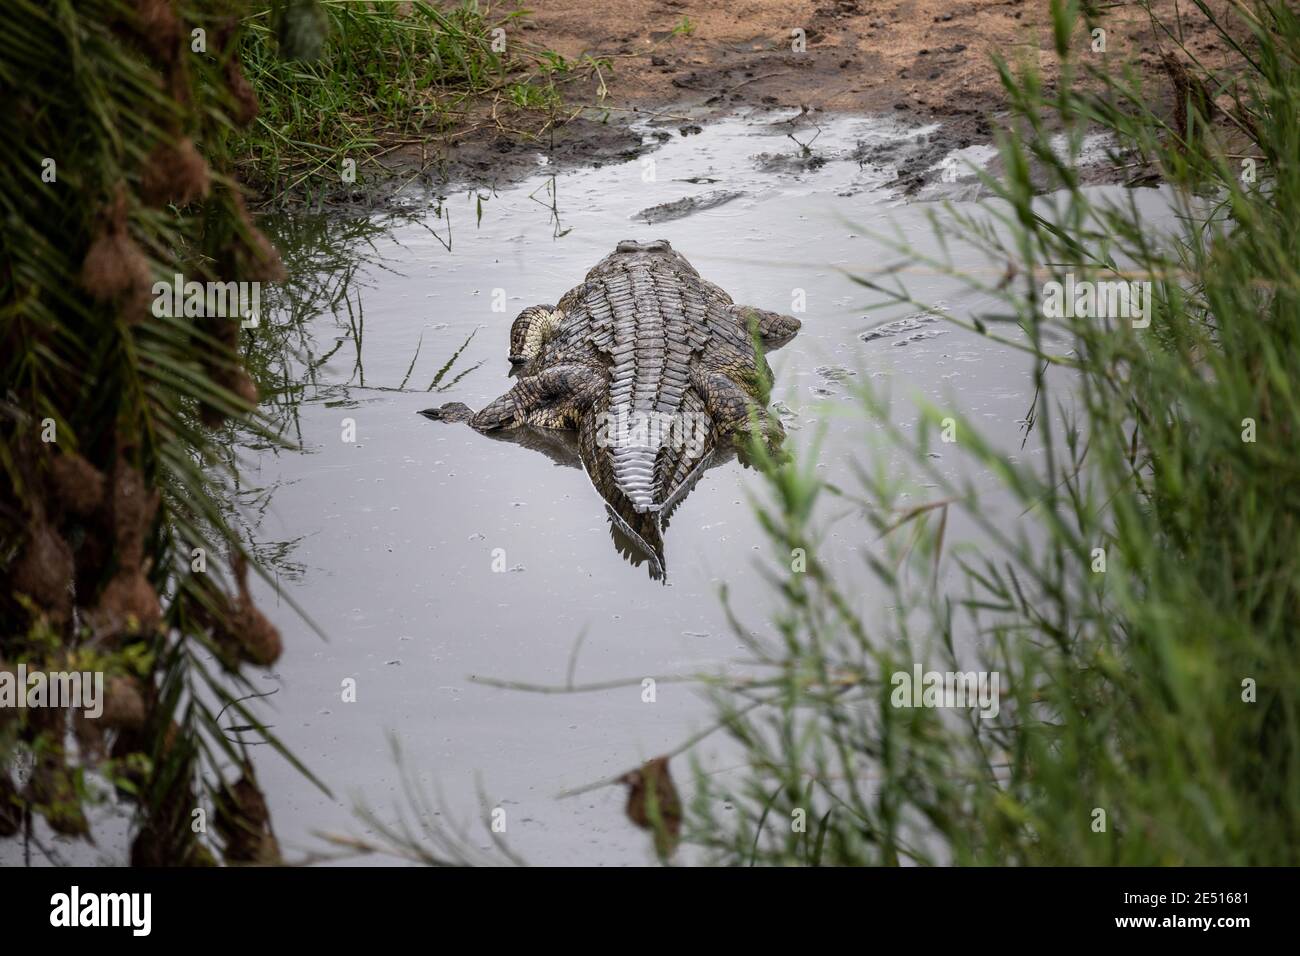 A nile crocodile lurking in a shallow pool of water in a cane thicket Stock Photo